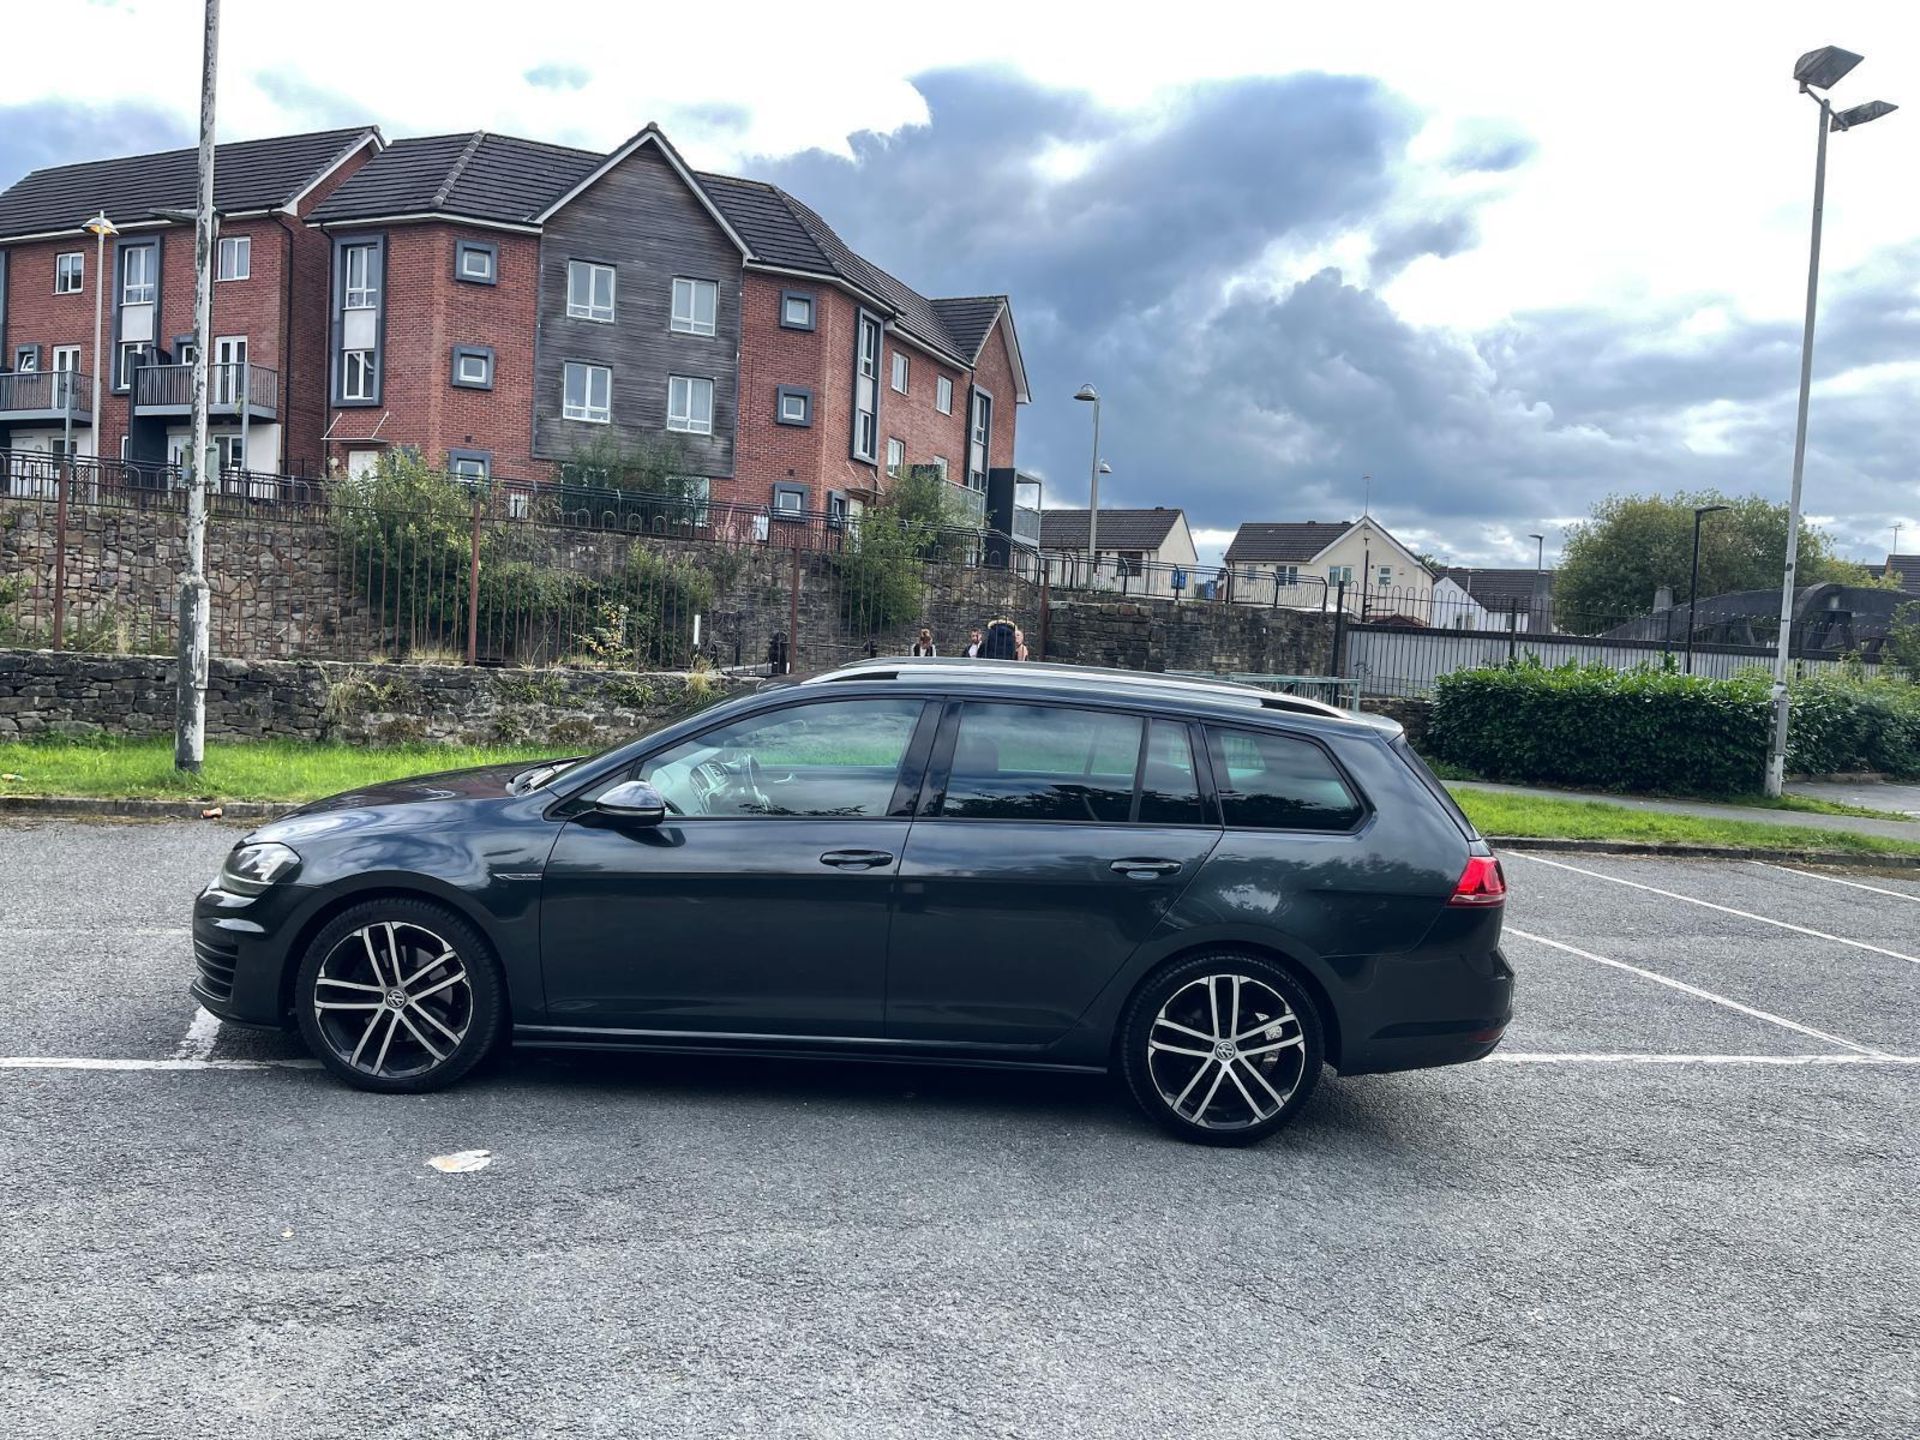 66 PLATE GOLF GTD : USUAL REFINEMENTS AND MORE - 12 MONTH MOT (NO VAT ON HAMMER)